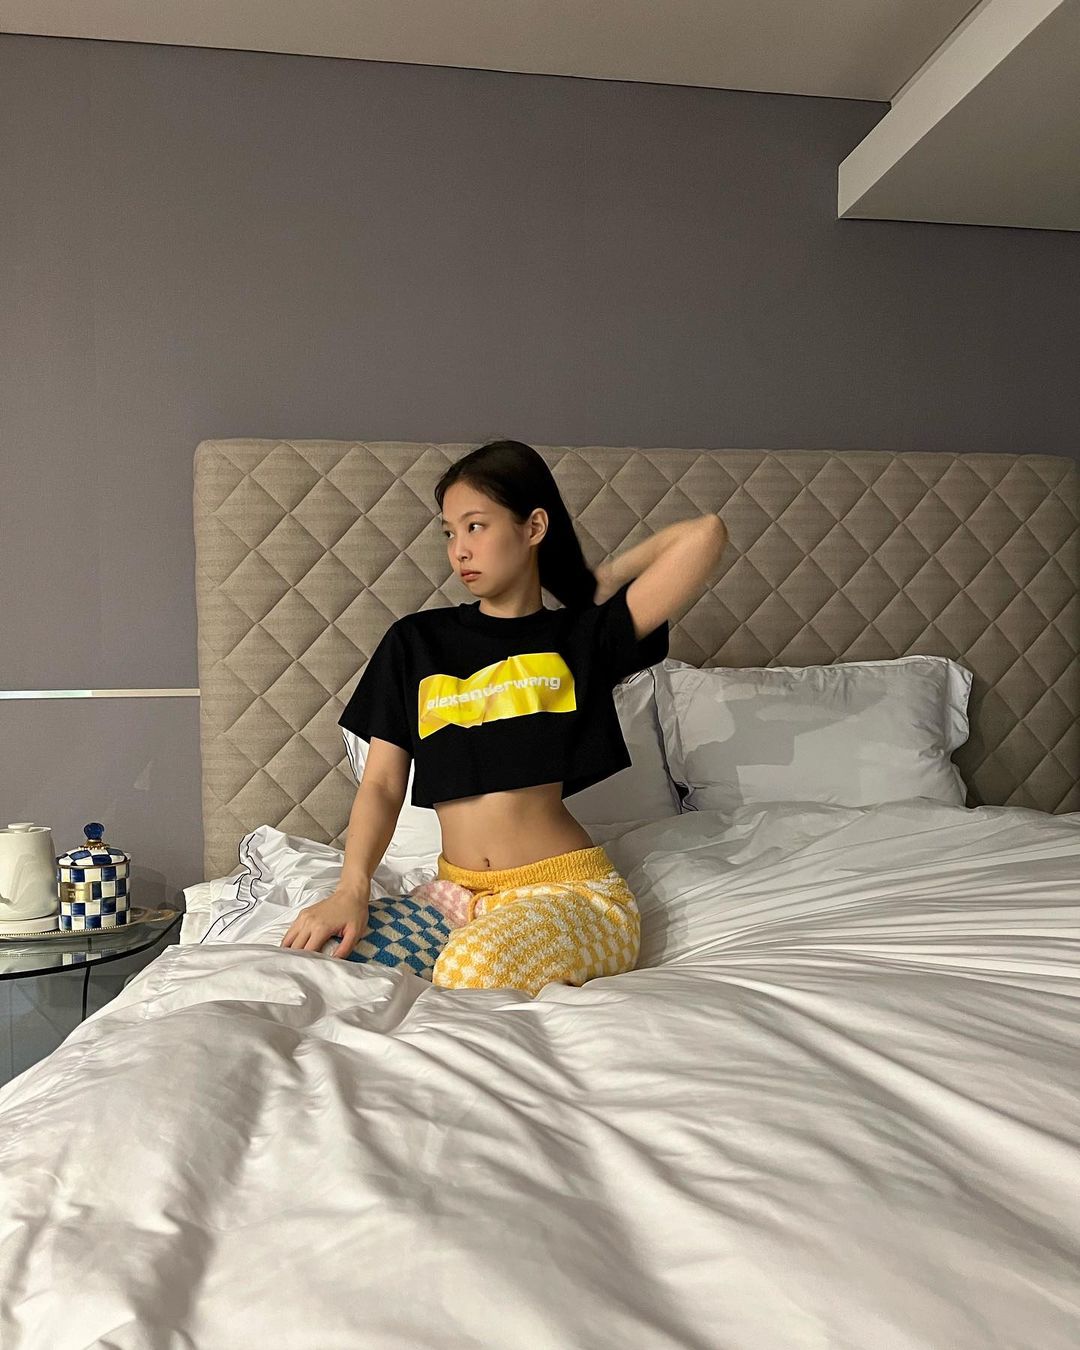 Jennie wears a crop top and has a healing time with her dogs